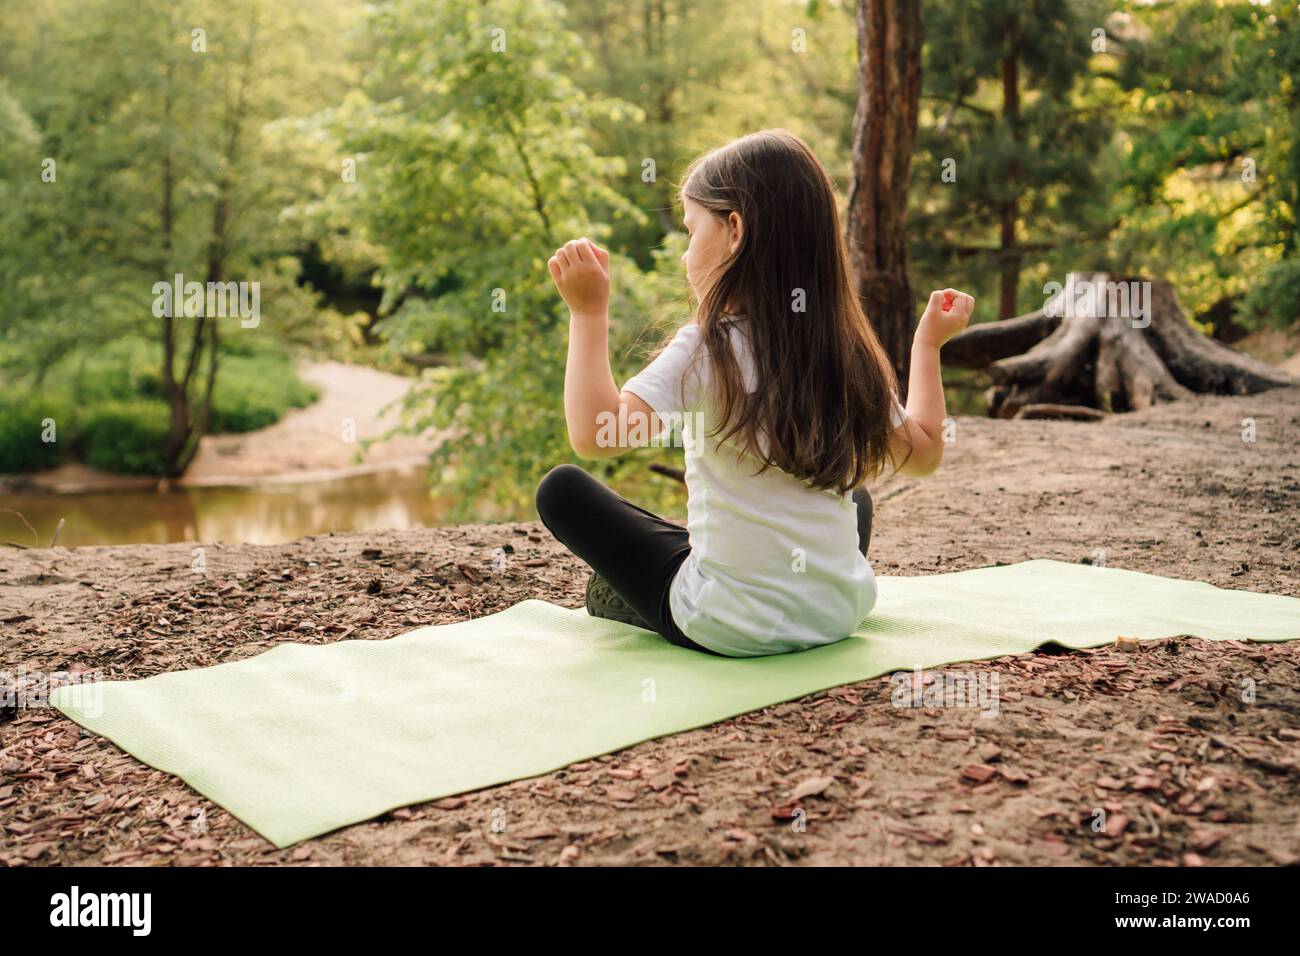 Rear view of female sporty child peacefully sitting on green mat in yoga pose with raised arms. Little girl with long brown hair closed eyes and doing Stock Photo